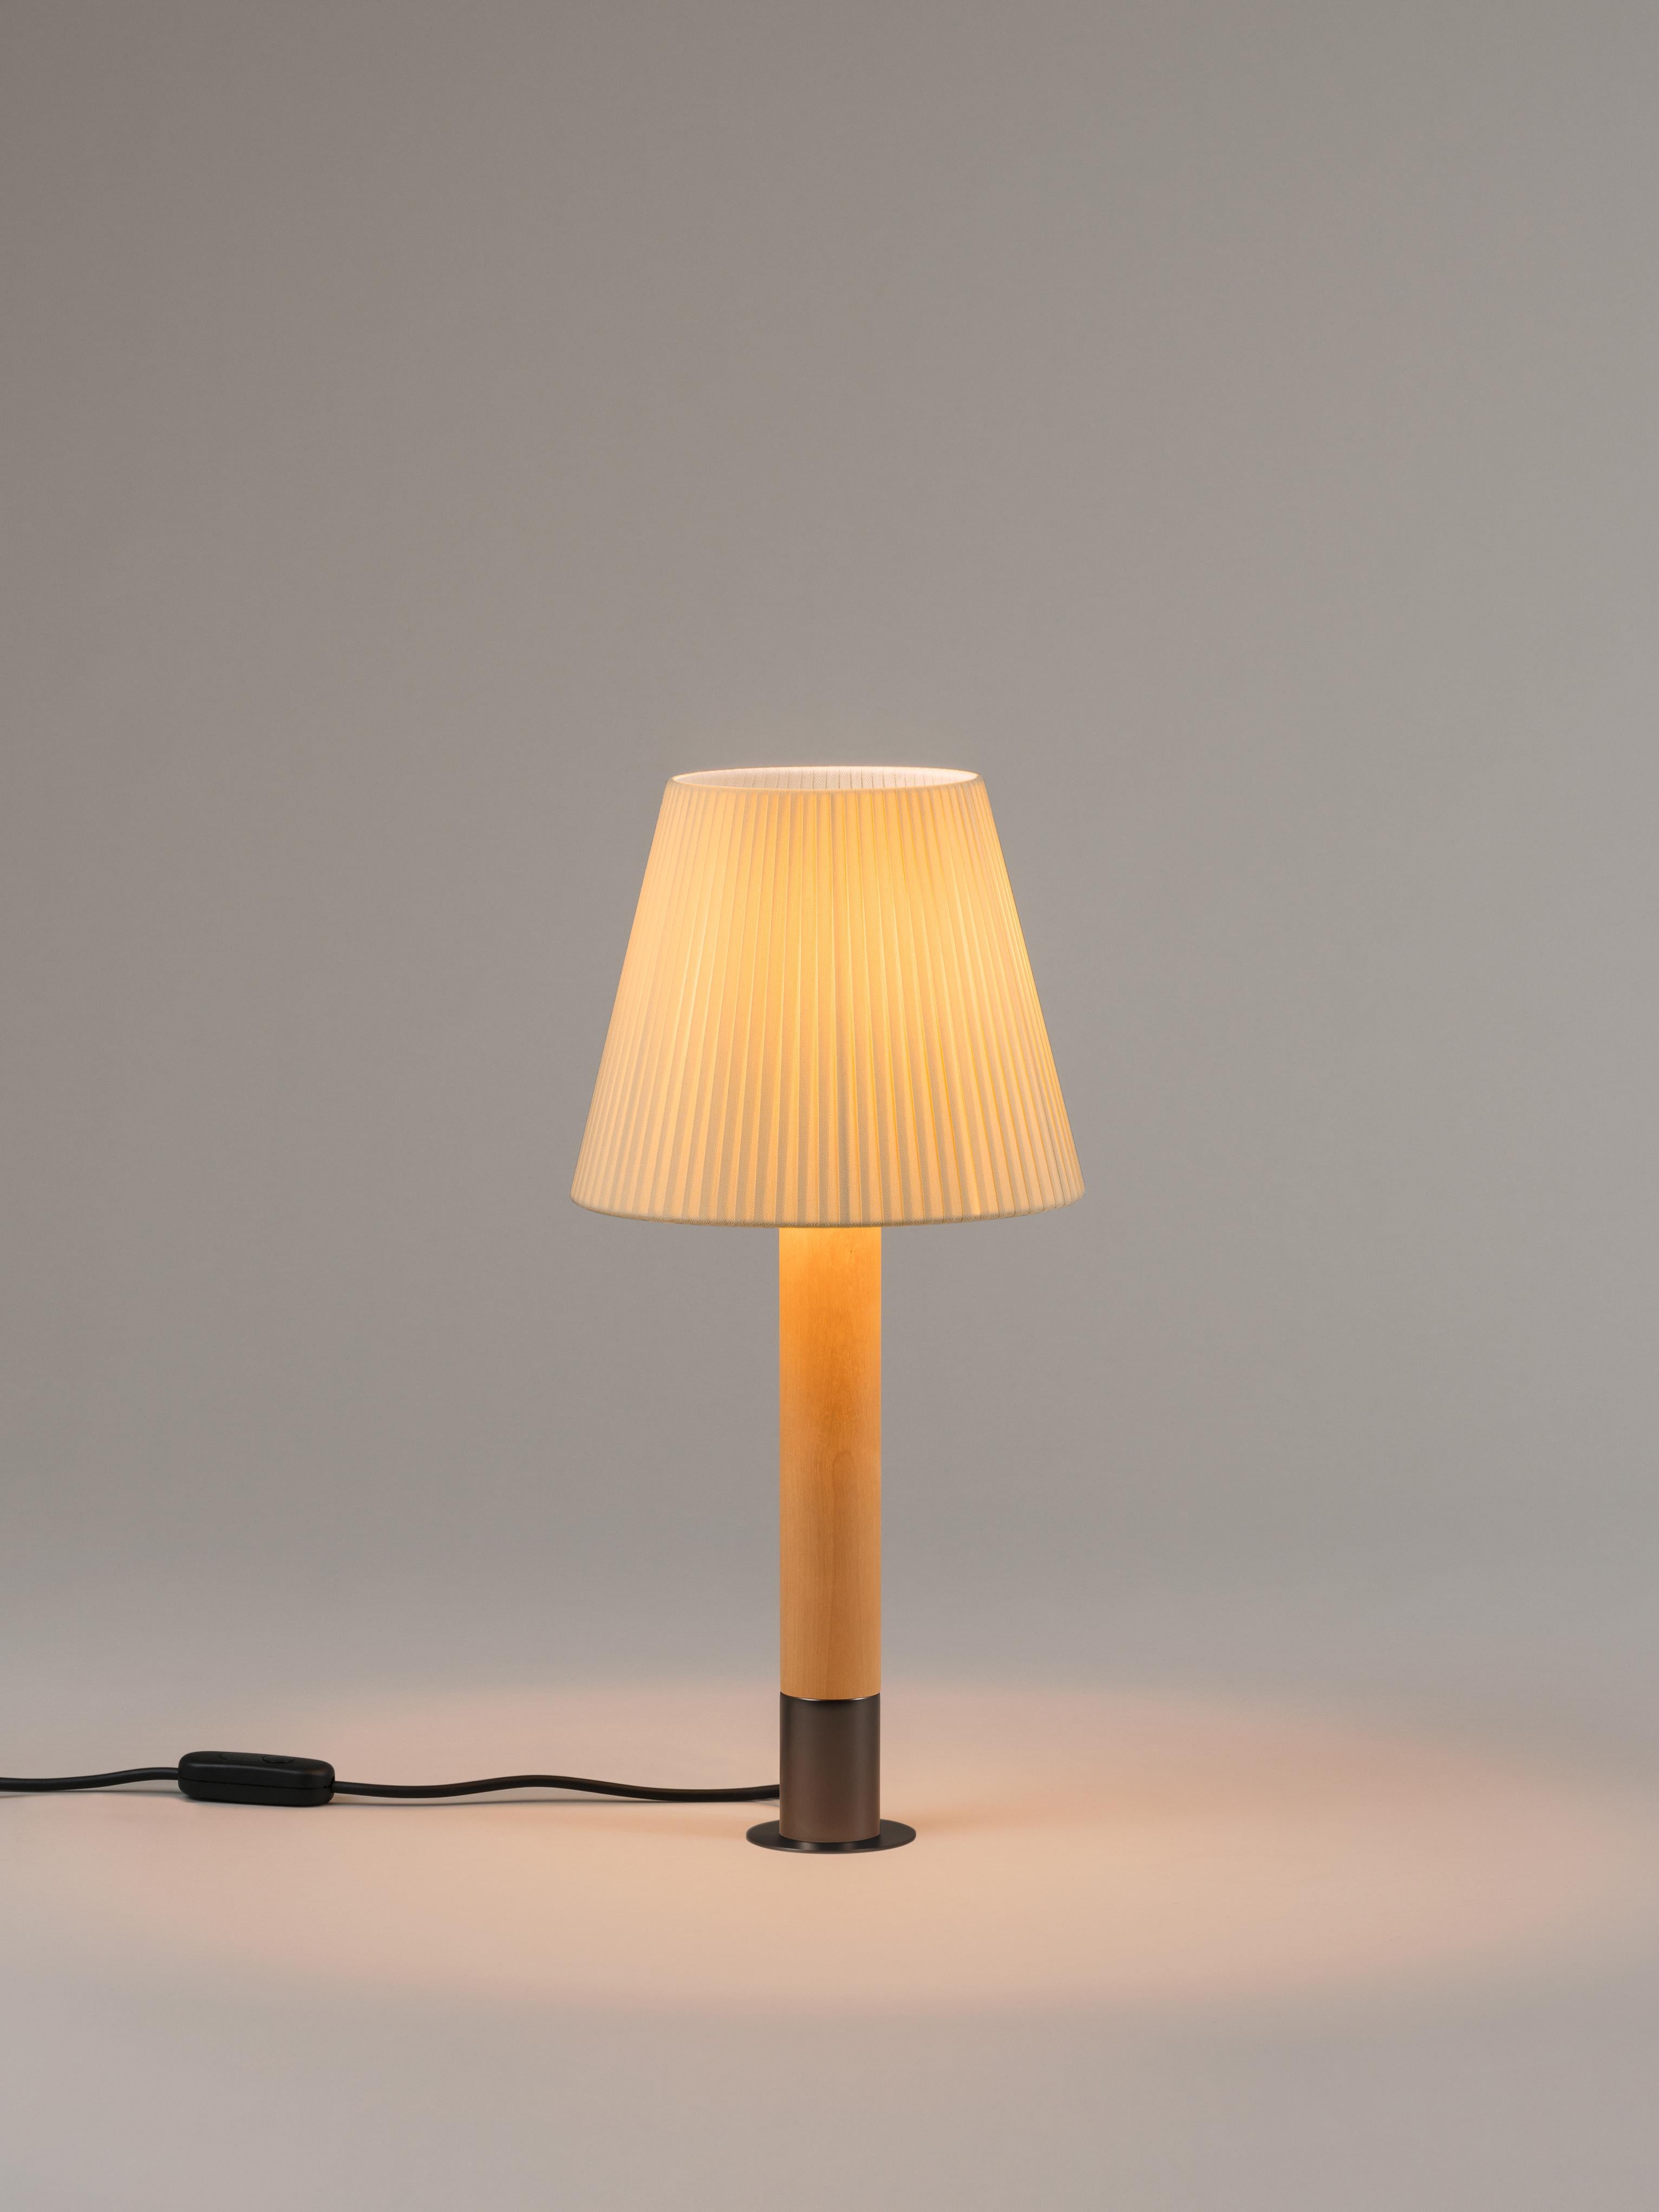 Bronze and Natural Básica M1 table lamp by Santiago Roqueta, Santa & Cole
Dimensions: D 25 x H 52 cm
Materials: Bronze, birch wood, ribbon.
Available in other shade colors and with or without the stabilizing disc.
Available in nickel or